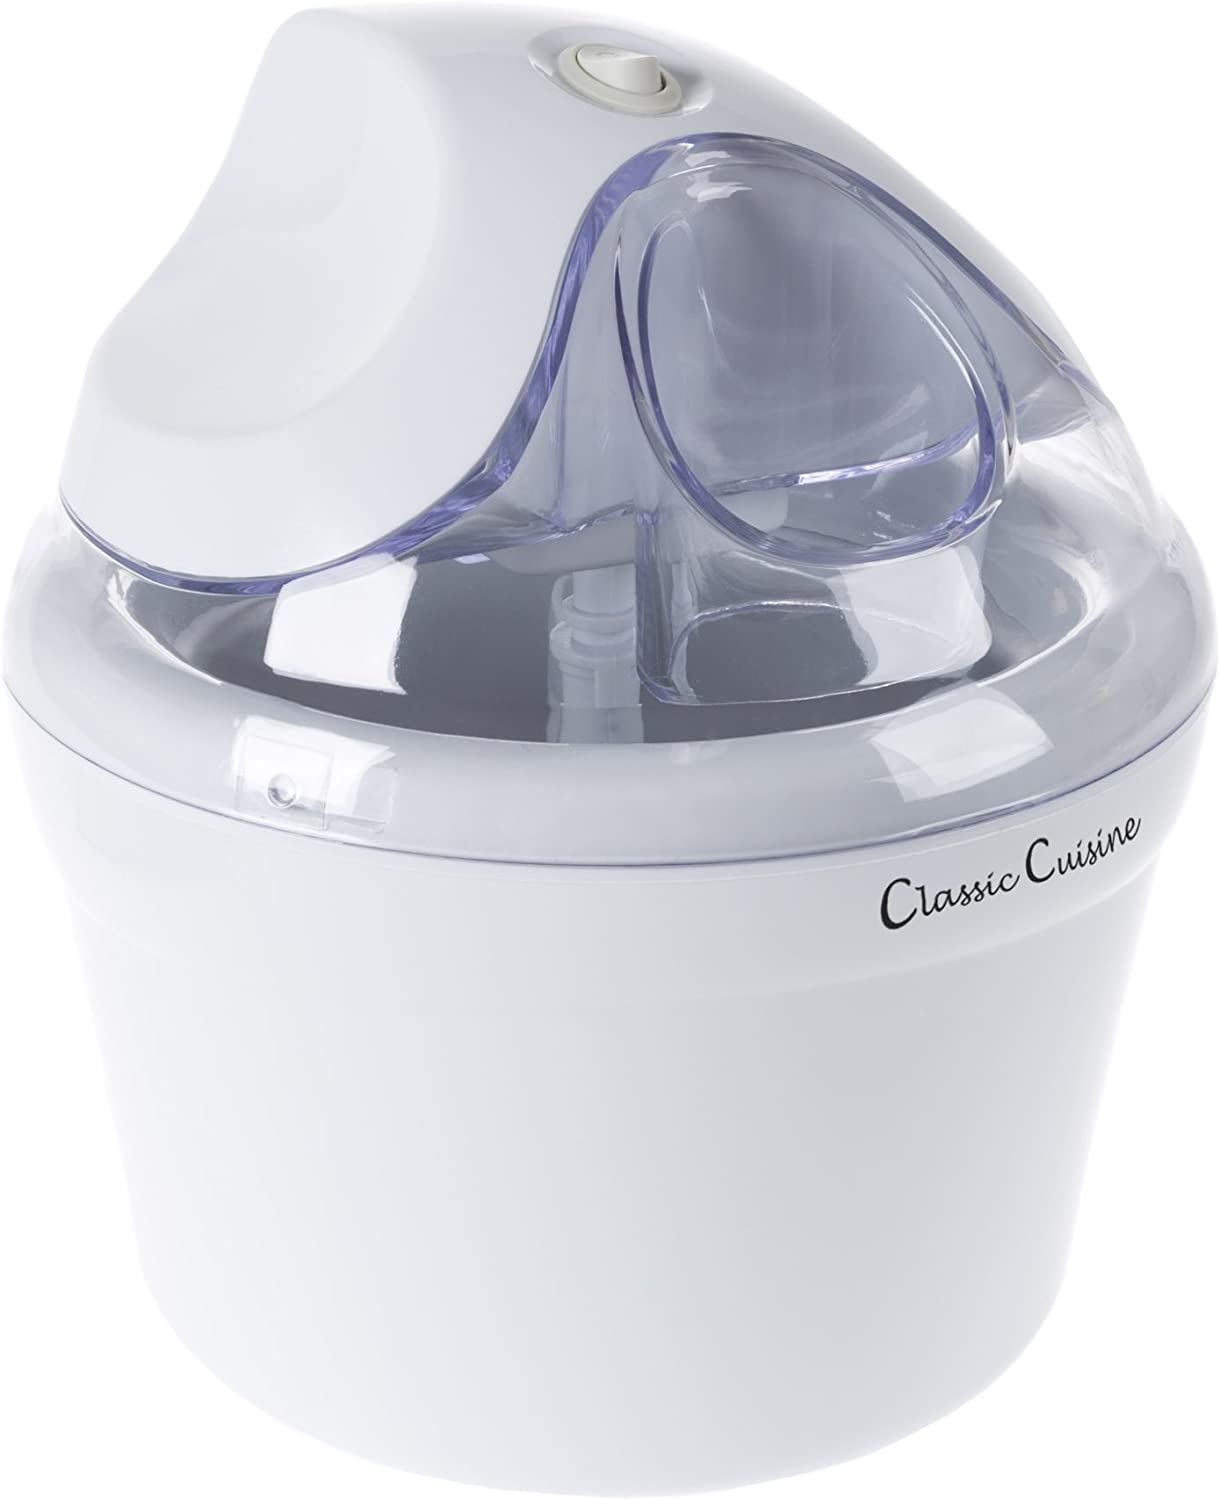 Ice Cream Maker- Also Makes Sorbet, Frozen Yogurt Dessert, 1 Quart Capacity Machine with Included Easy To Make Recipes by